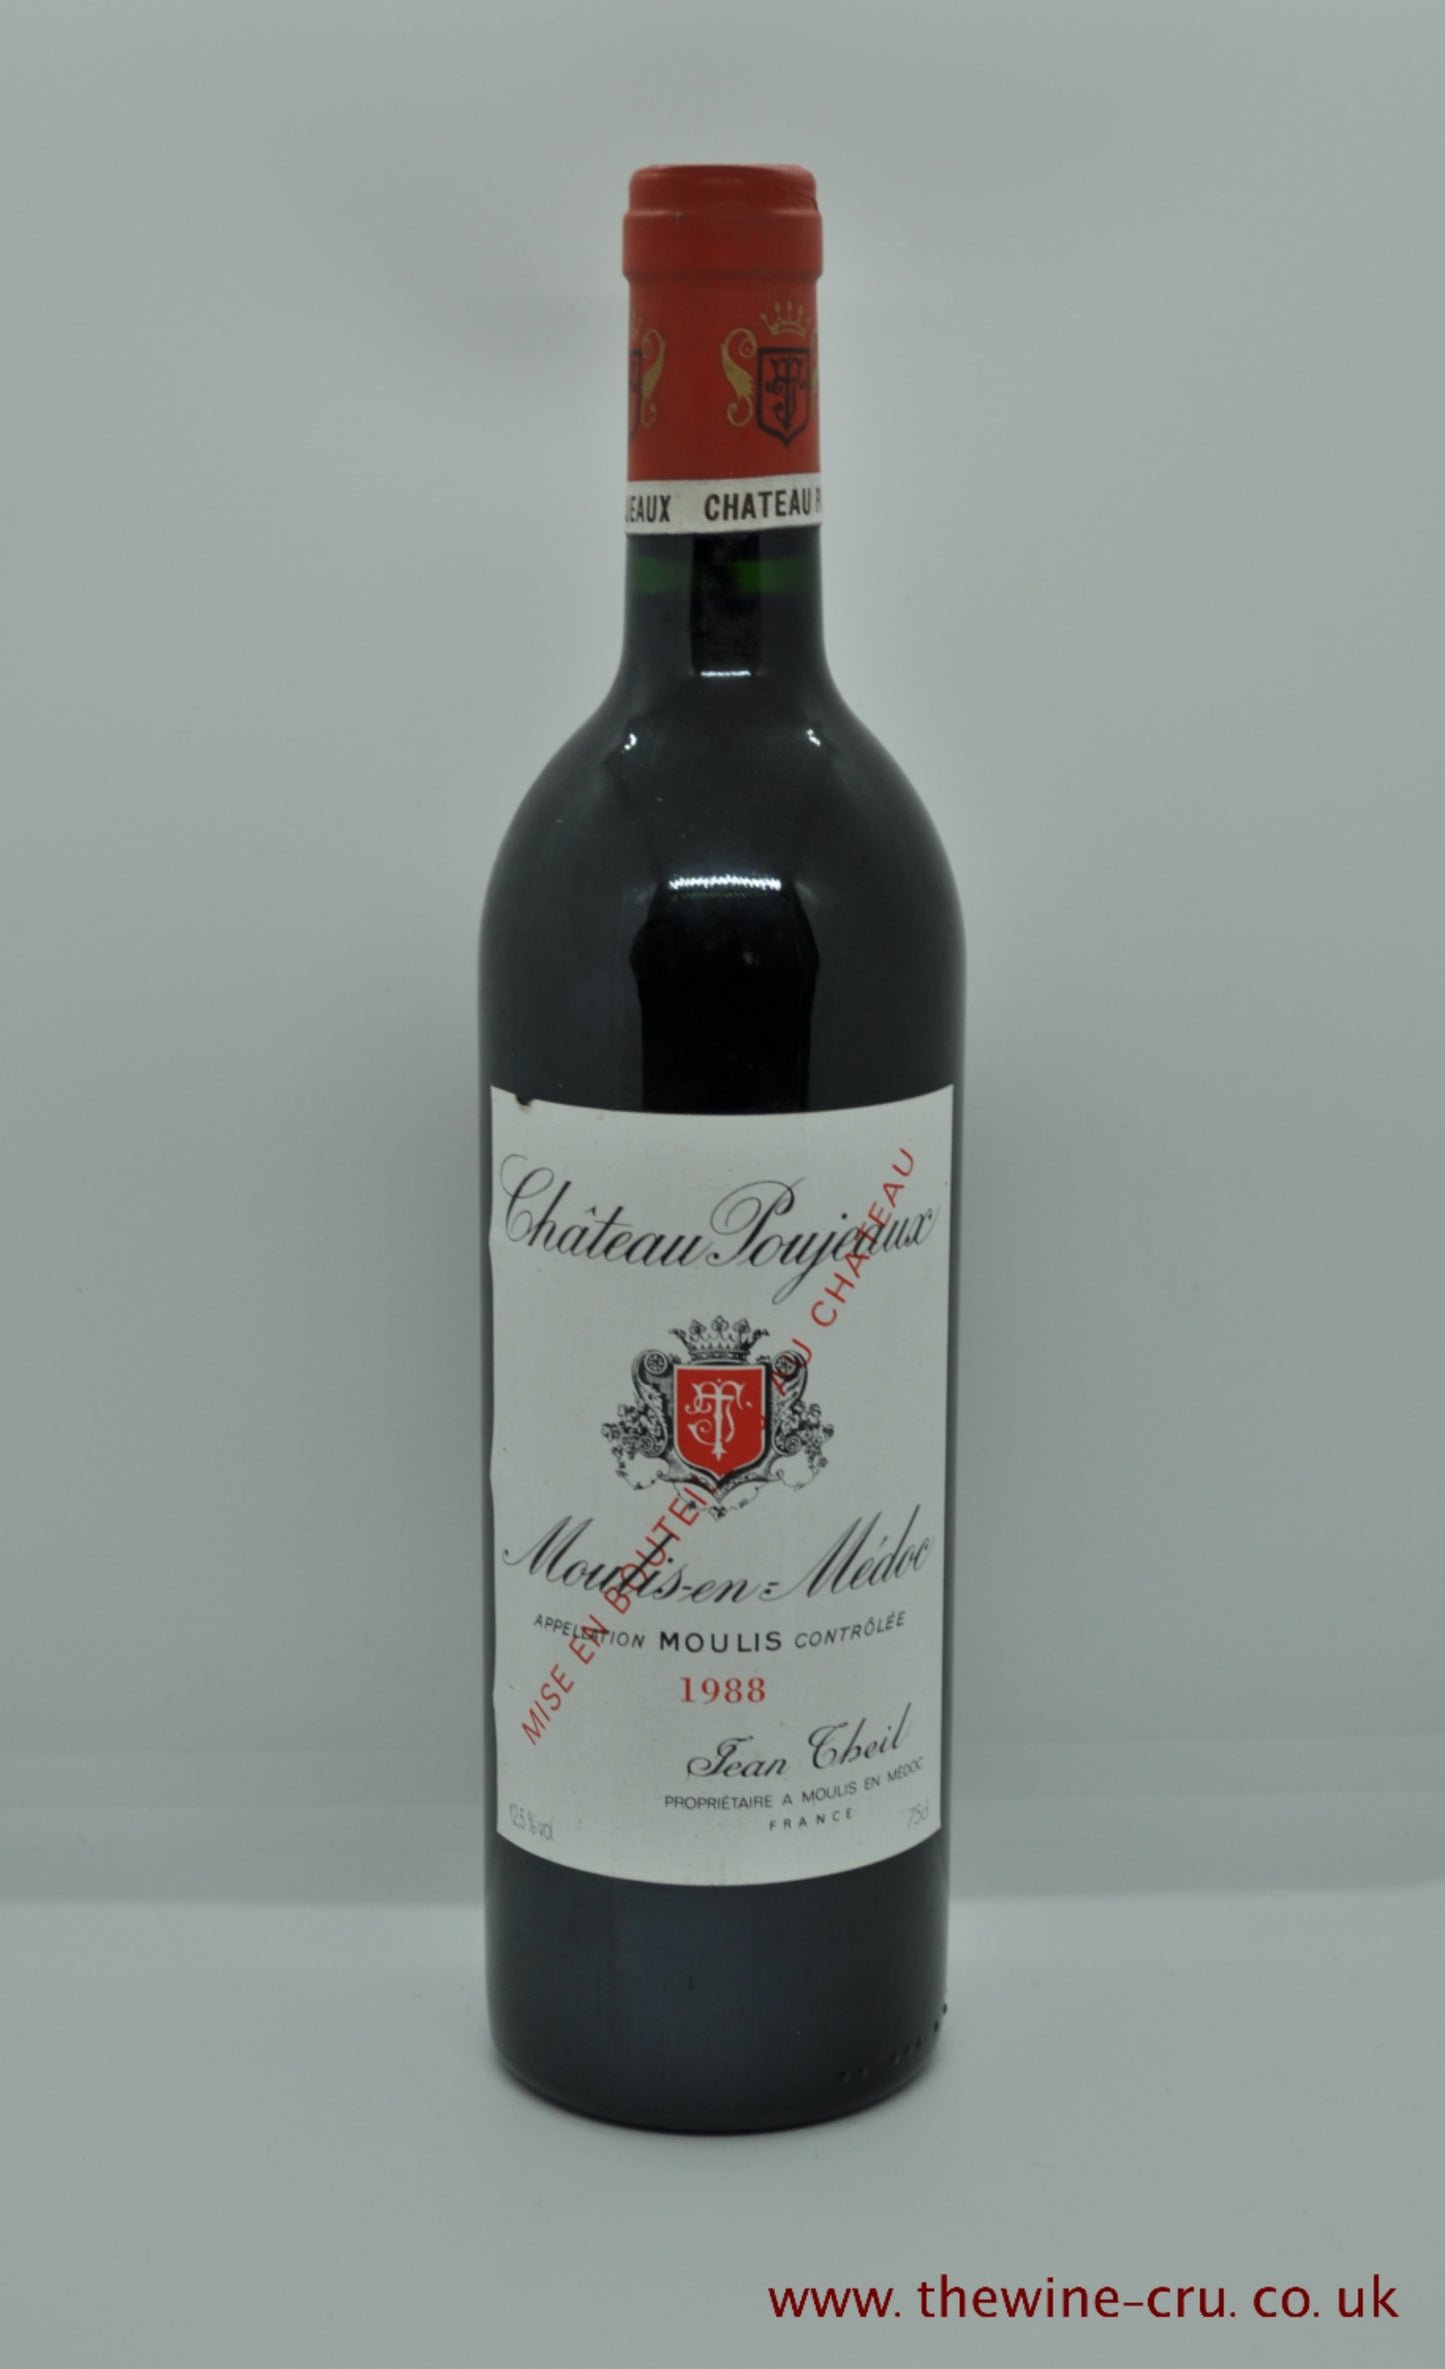 1988 vintage red wine. Chateau Poujeaux 1988 france Bordeaux. Immediate delivery UK. Free local delivery.